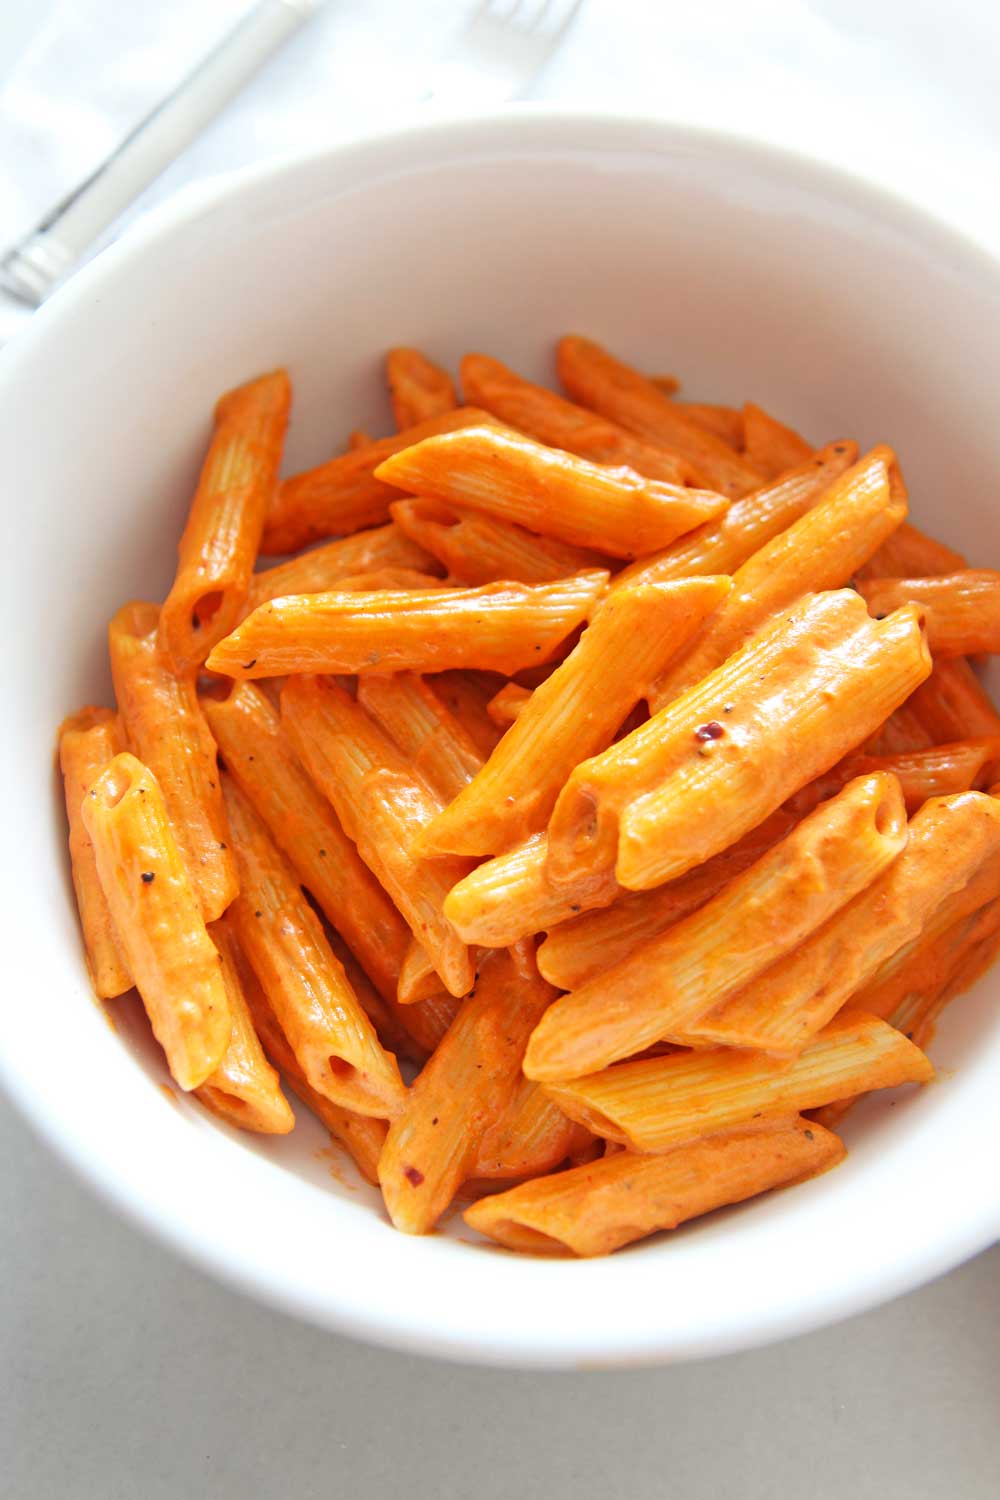 How To Make Penne Alla Vodka Pasta (Carbone copycat recipe). Grab cream, garlic, tomato paste, red pepper flakes, and pasta. This is a 20 minute one pot recipe that is a perfect weeknight dinner or pasta part. This is a copycat Carbone's Spicy Vodka sauce. Happy pasta making. www.ChopHappy.com #penneallavodka #vodkasauce